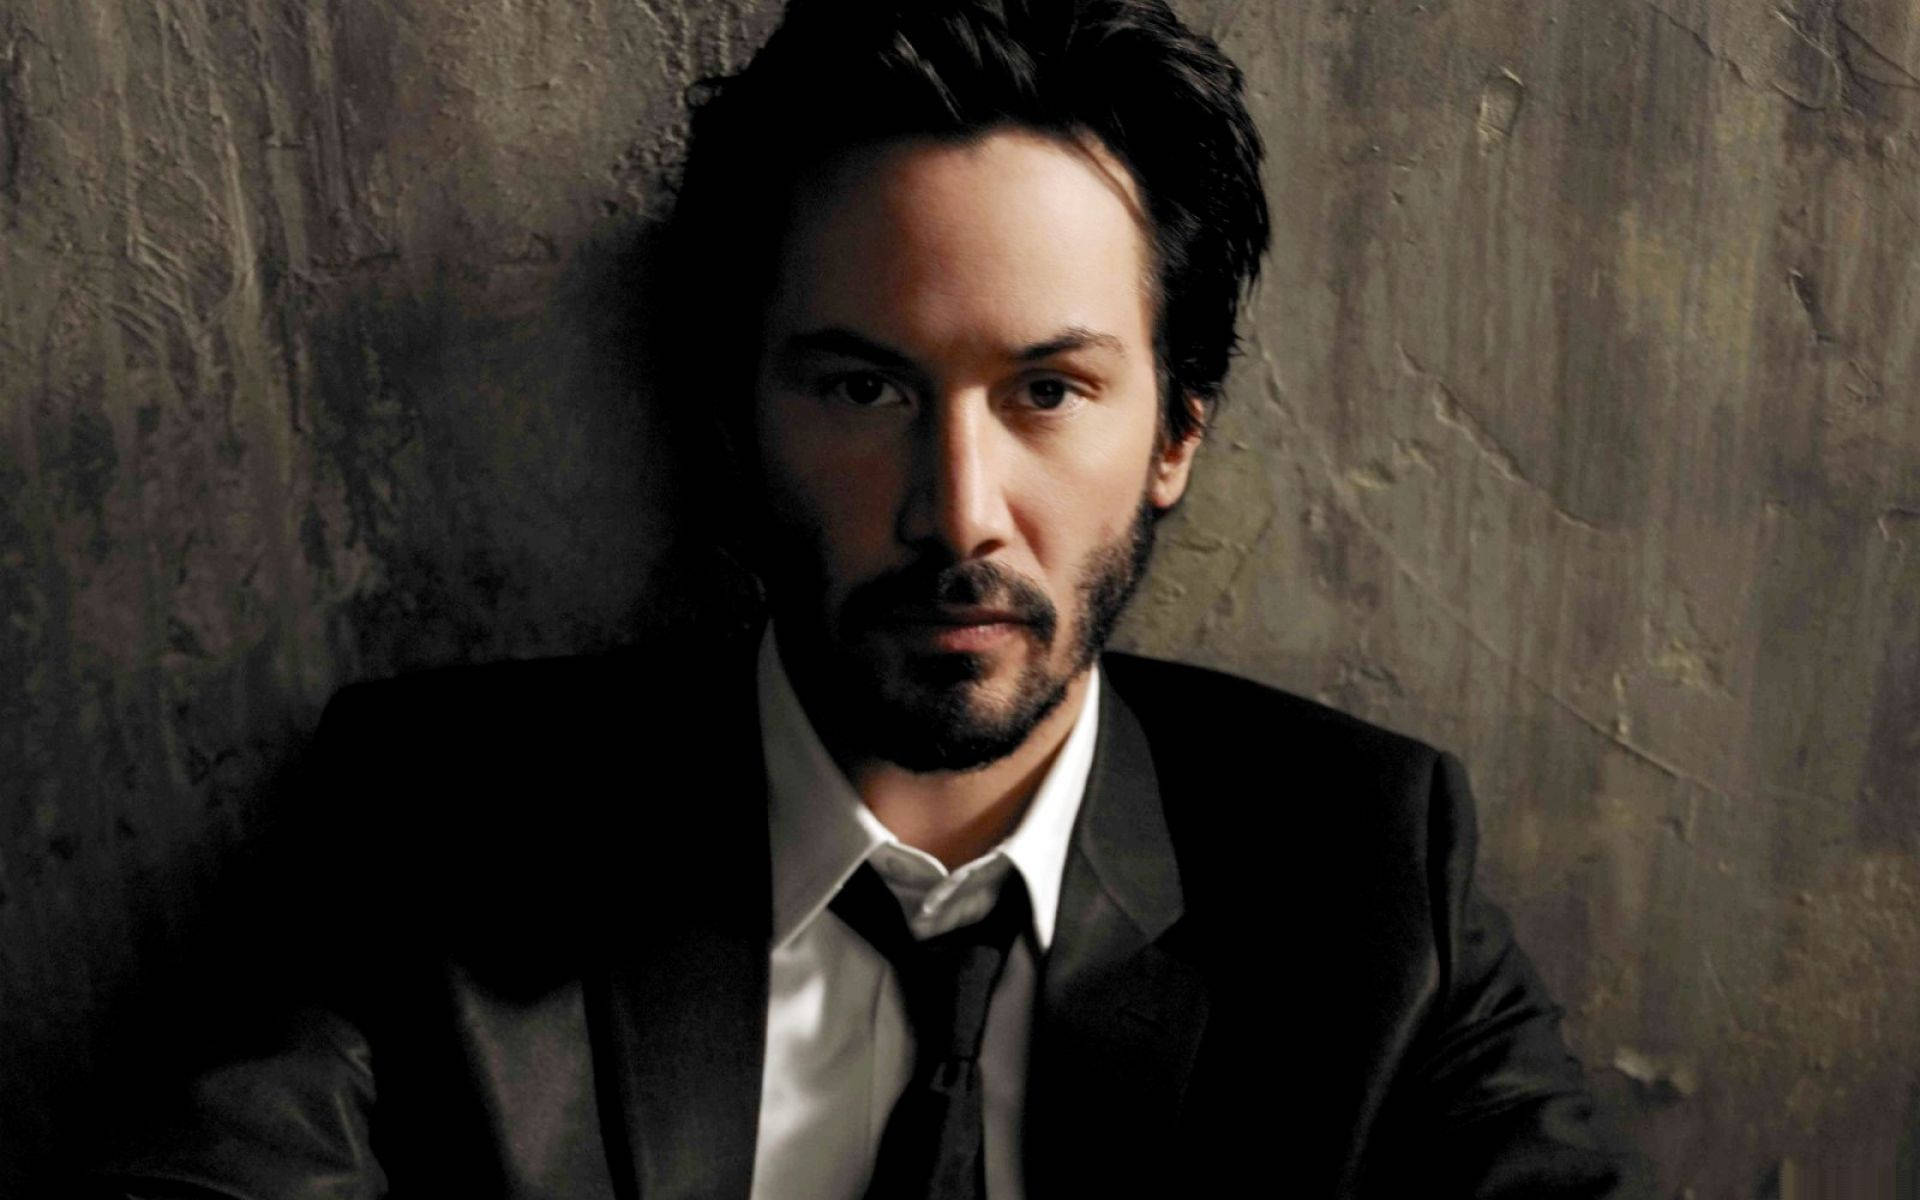 Celebrity Keanu Reeves Suit And Tie Background